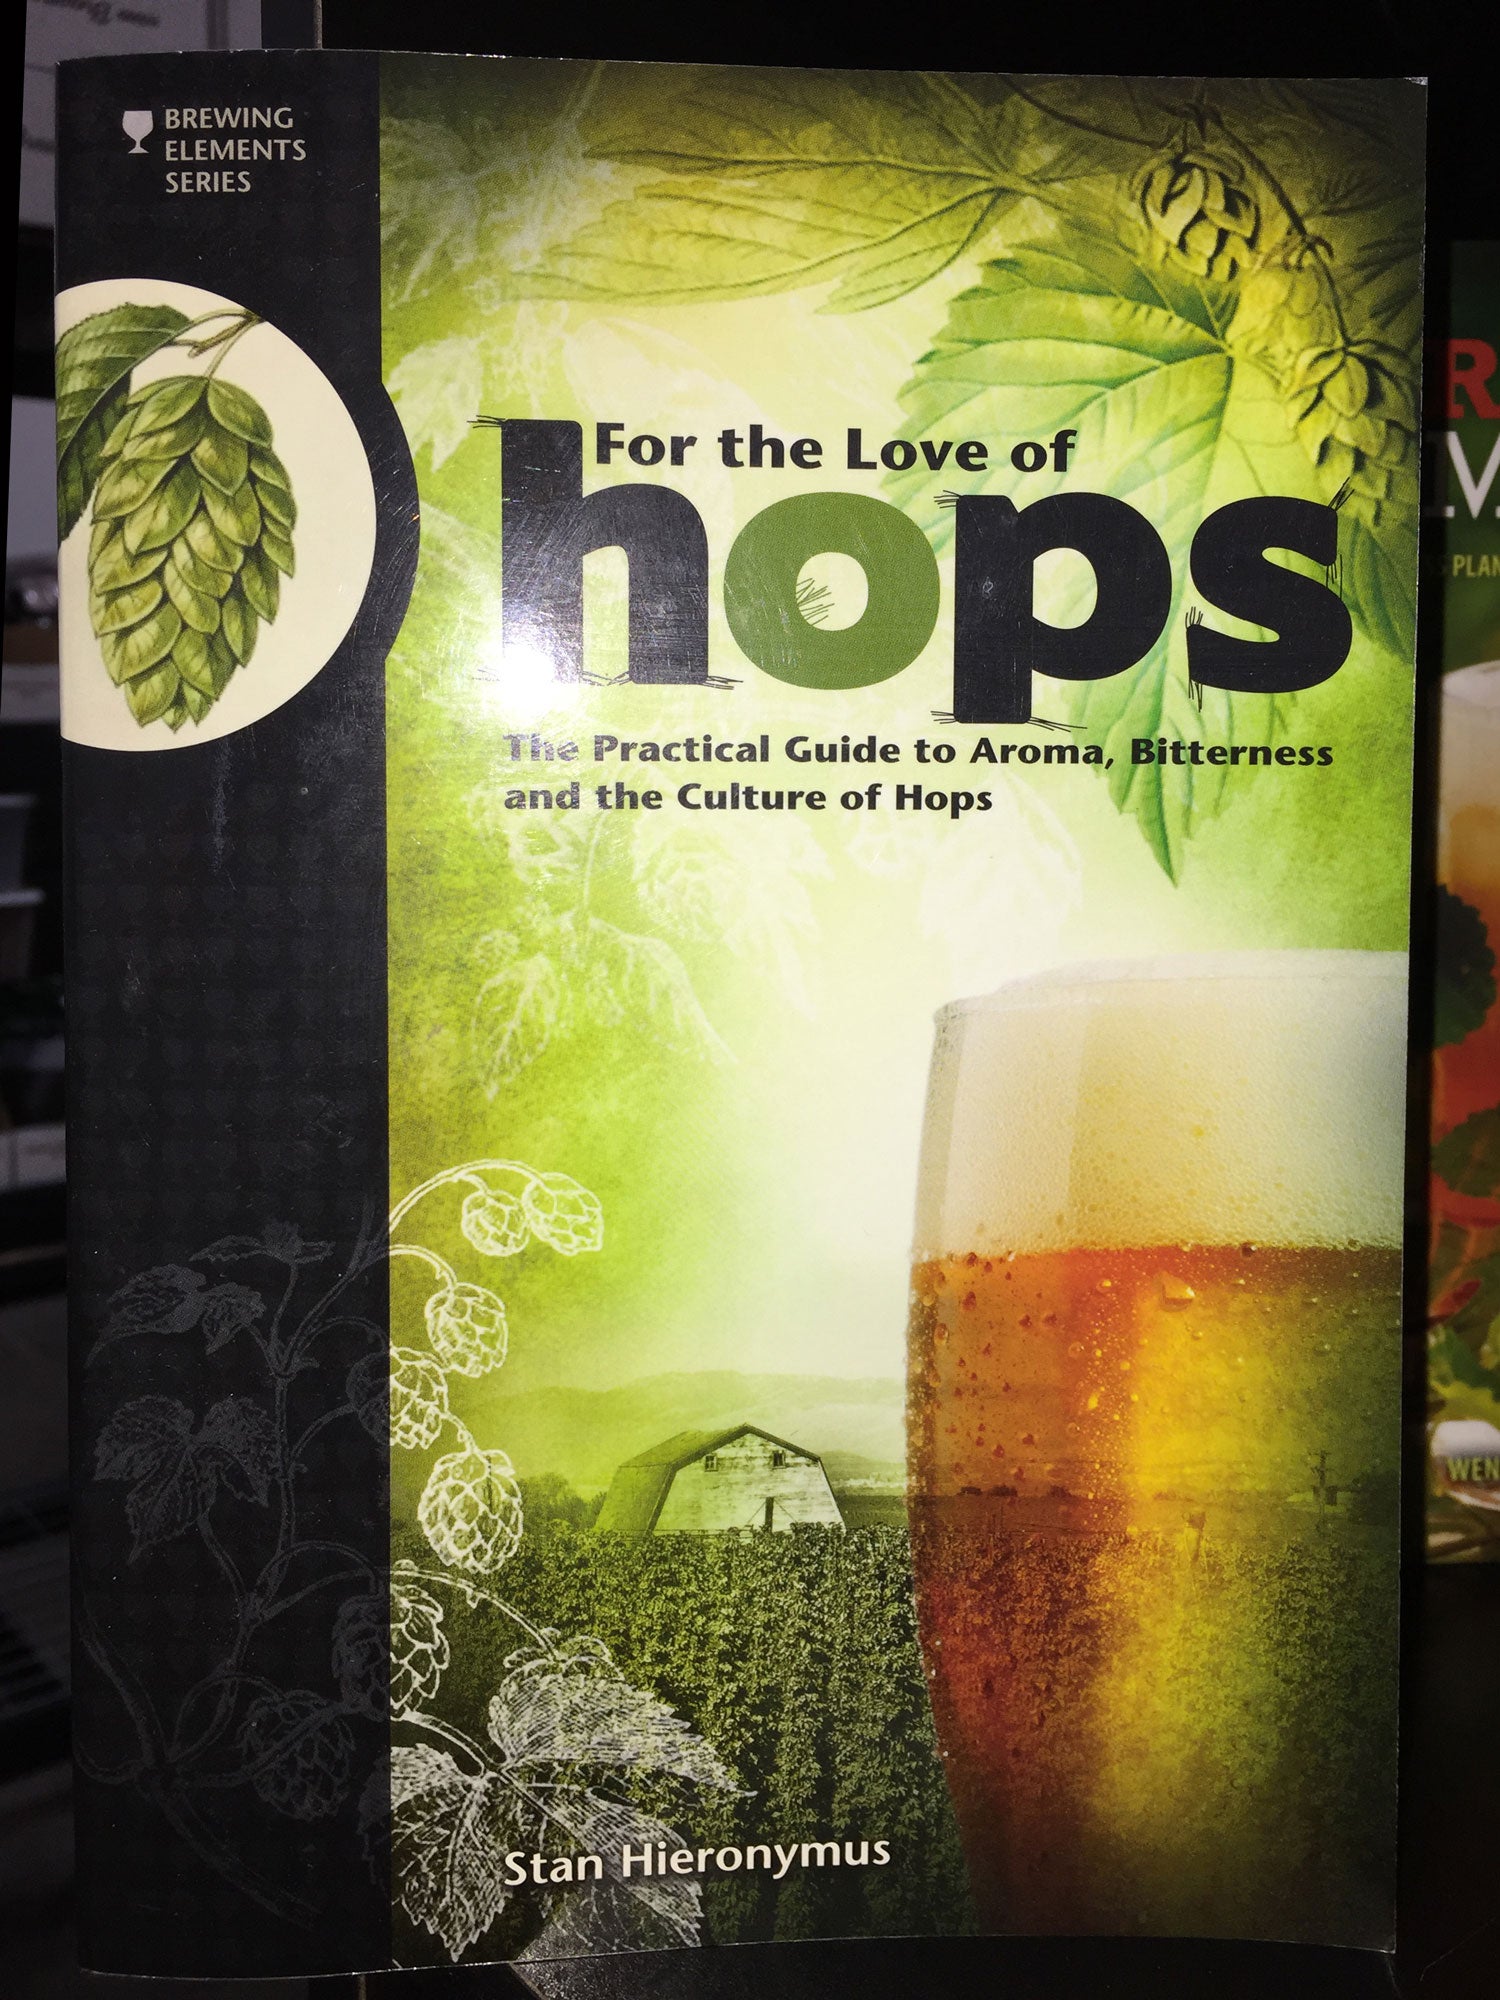 For The Love of Hops: The Practical Guide to Aroma, Bitterness and